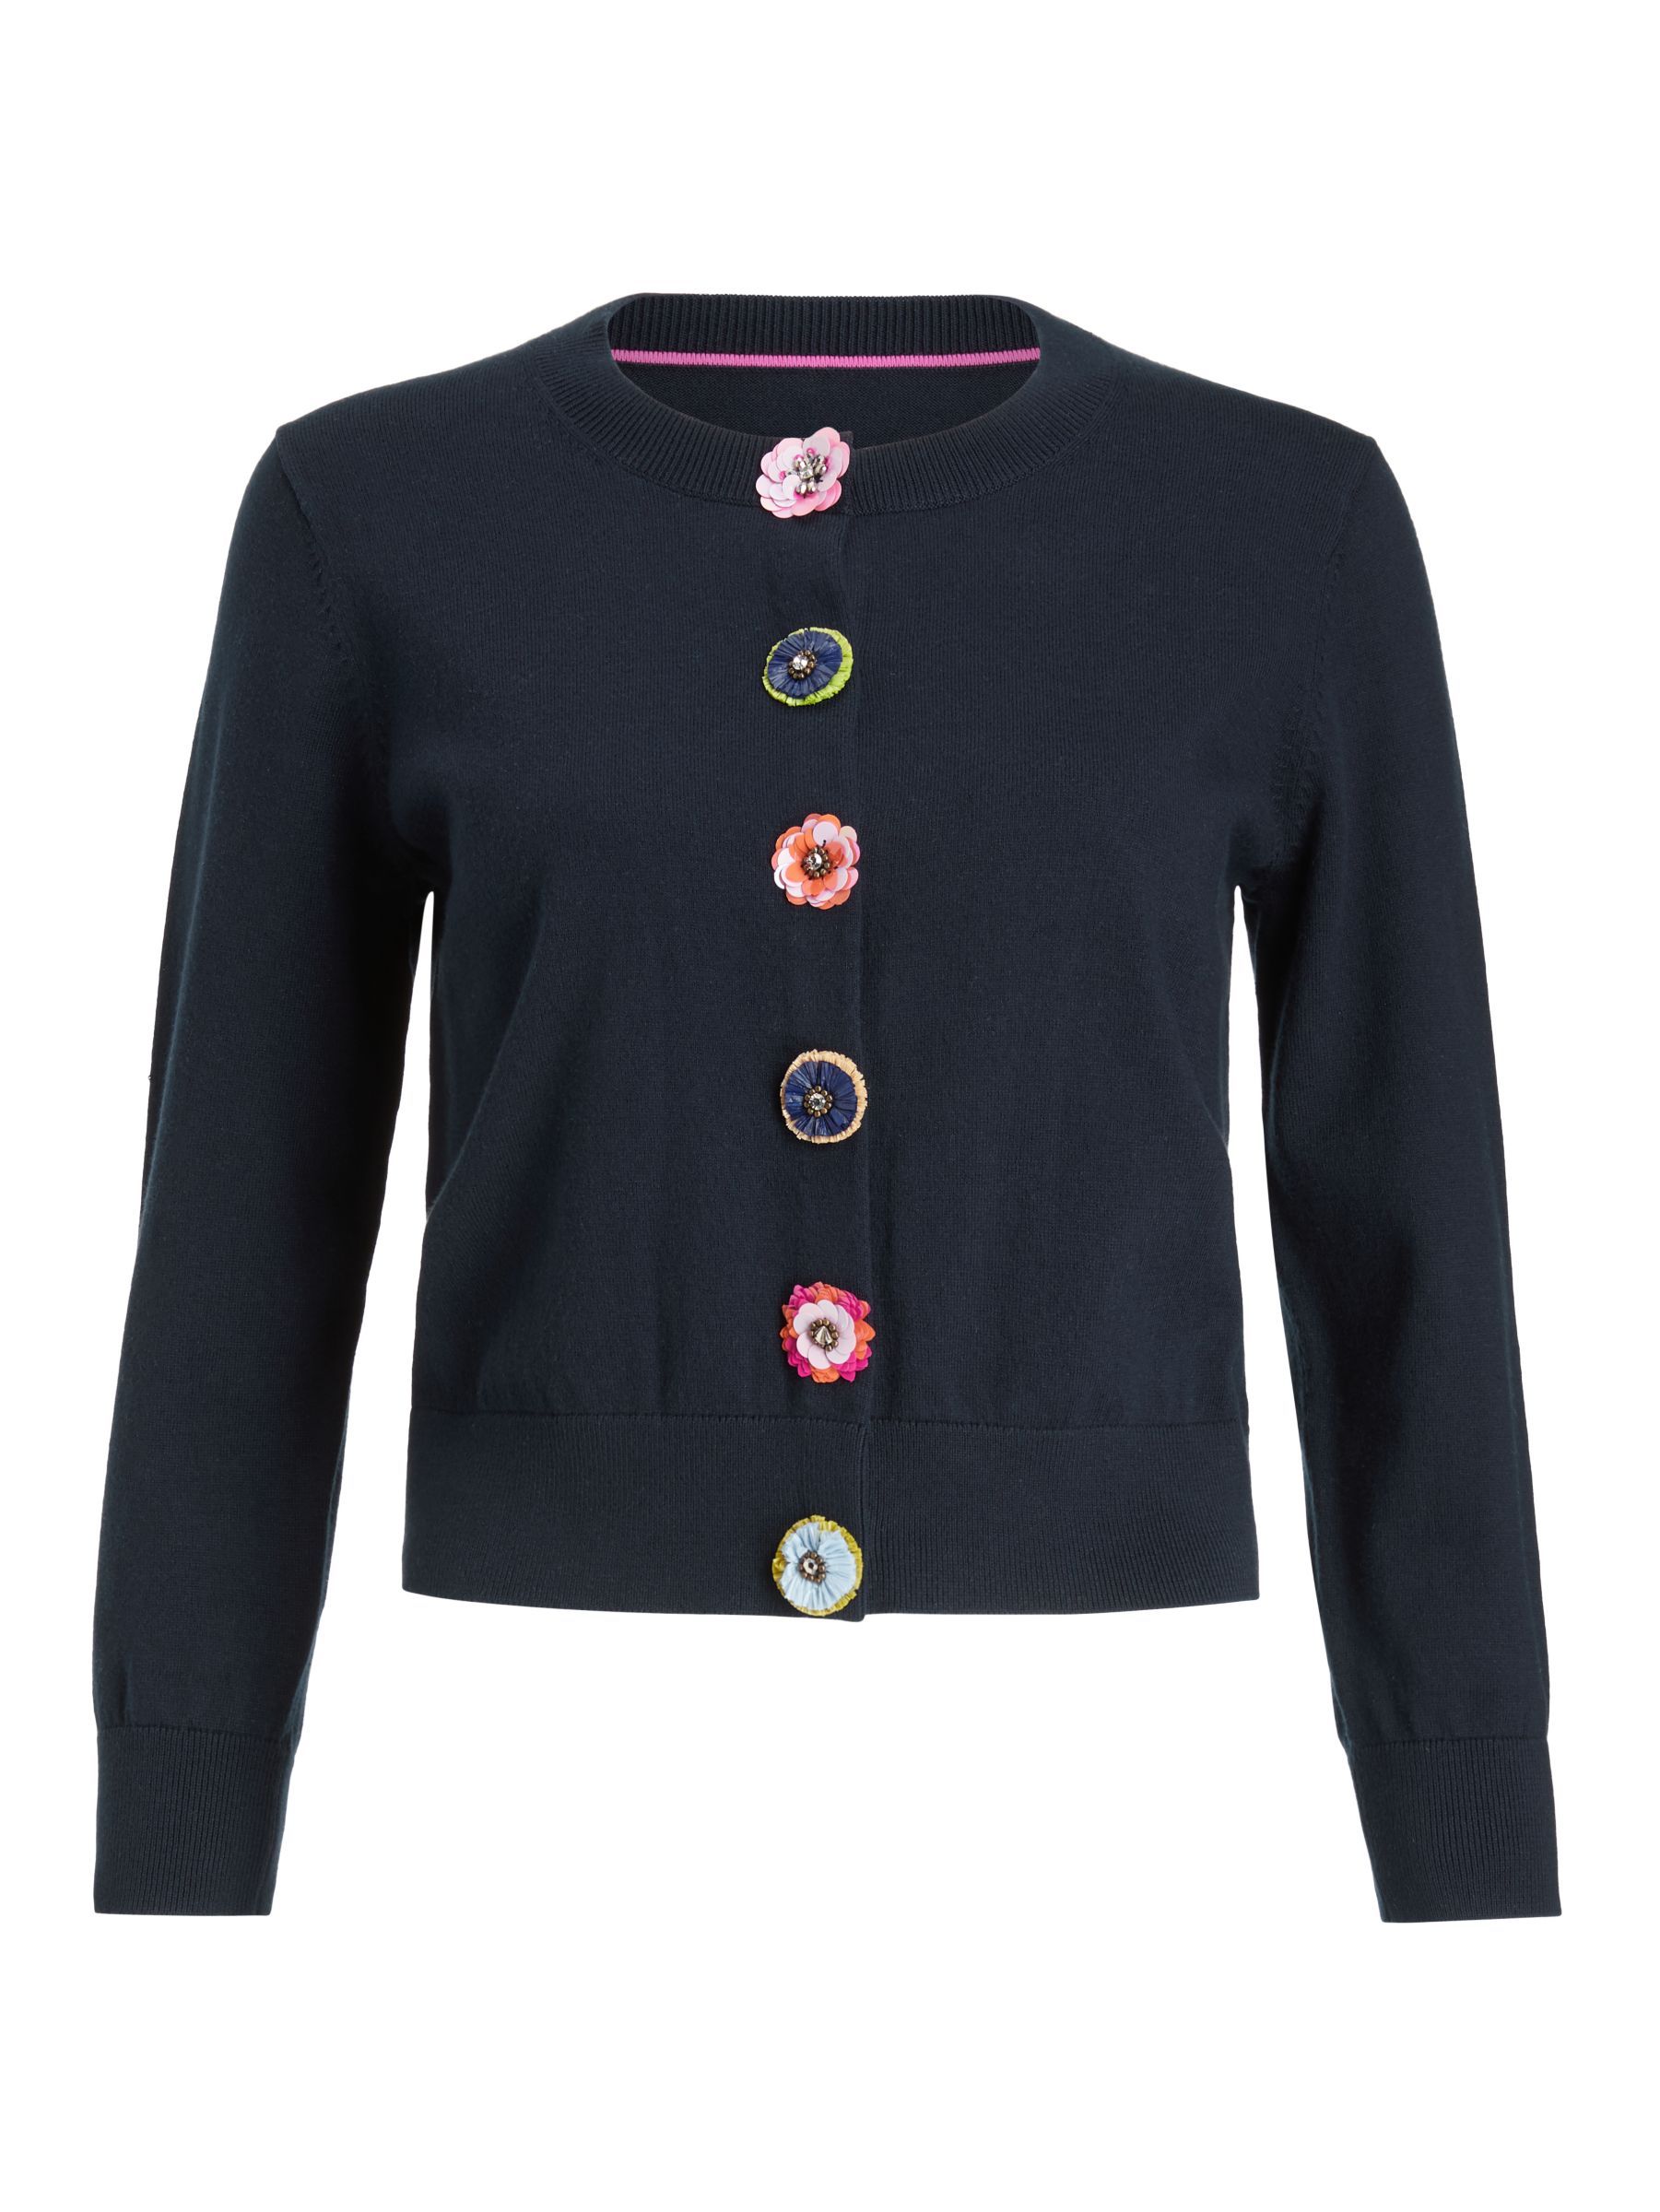 Boden Gowrie Floral Button Cardigan, Navy at John Lewis & Partners